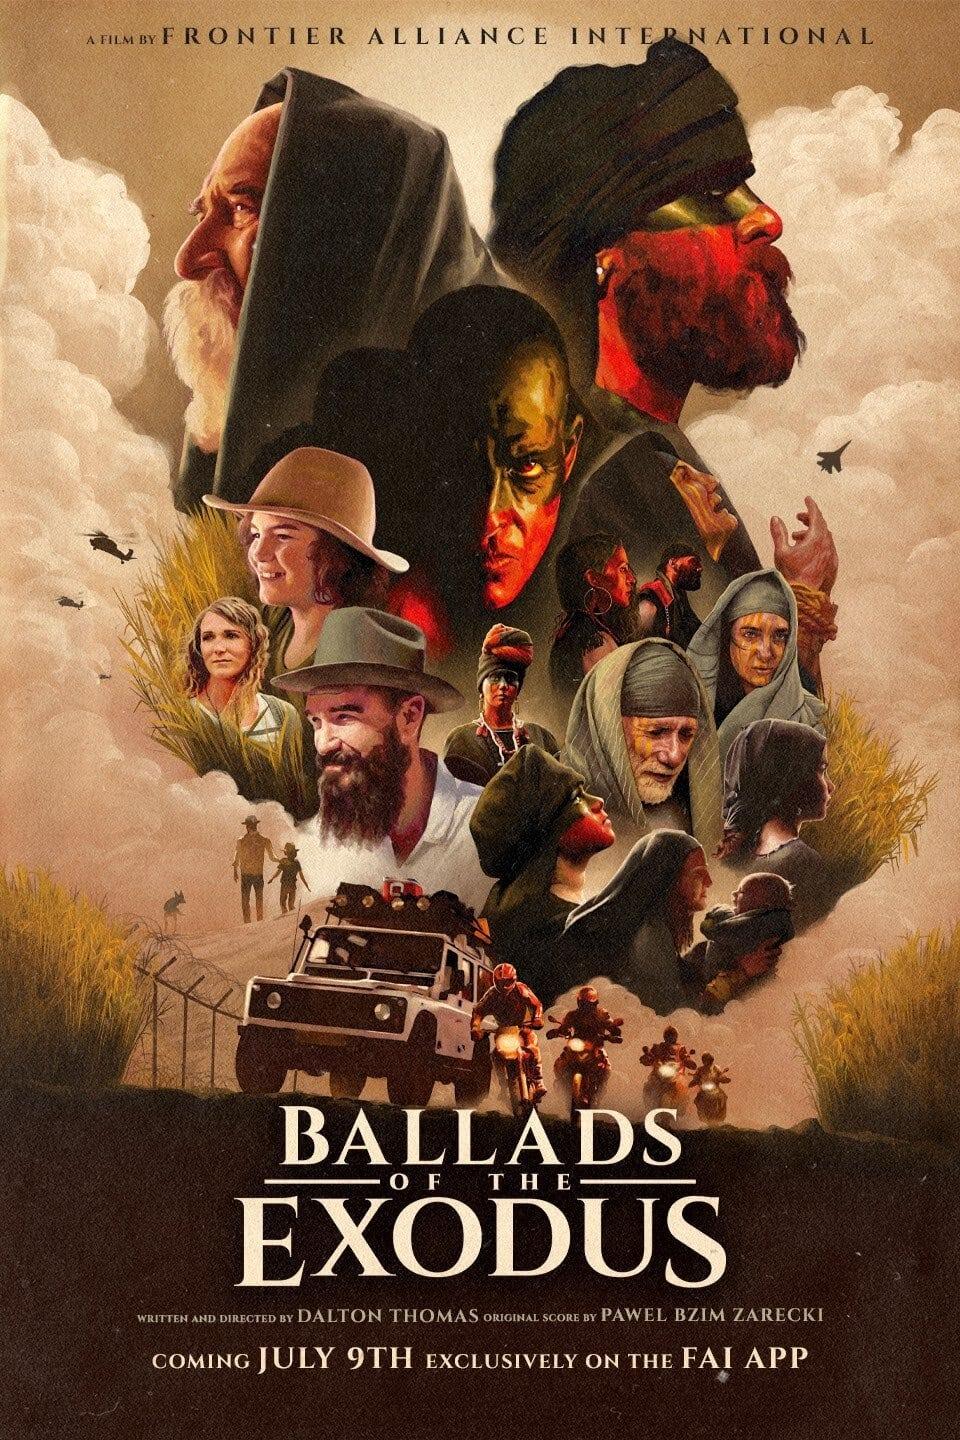 Ballads of the Exodus poster